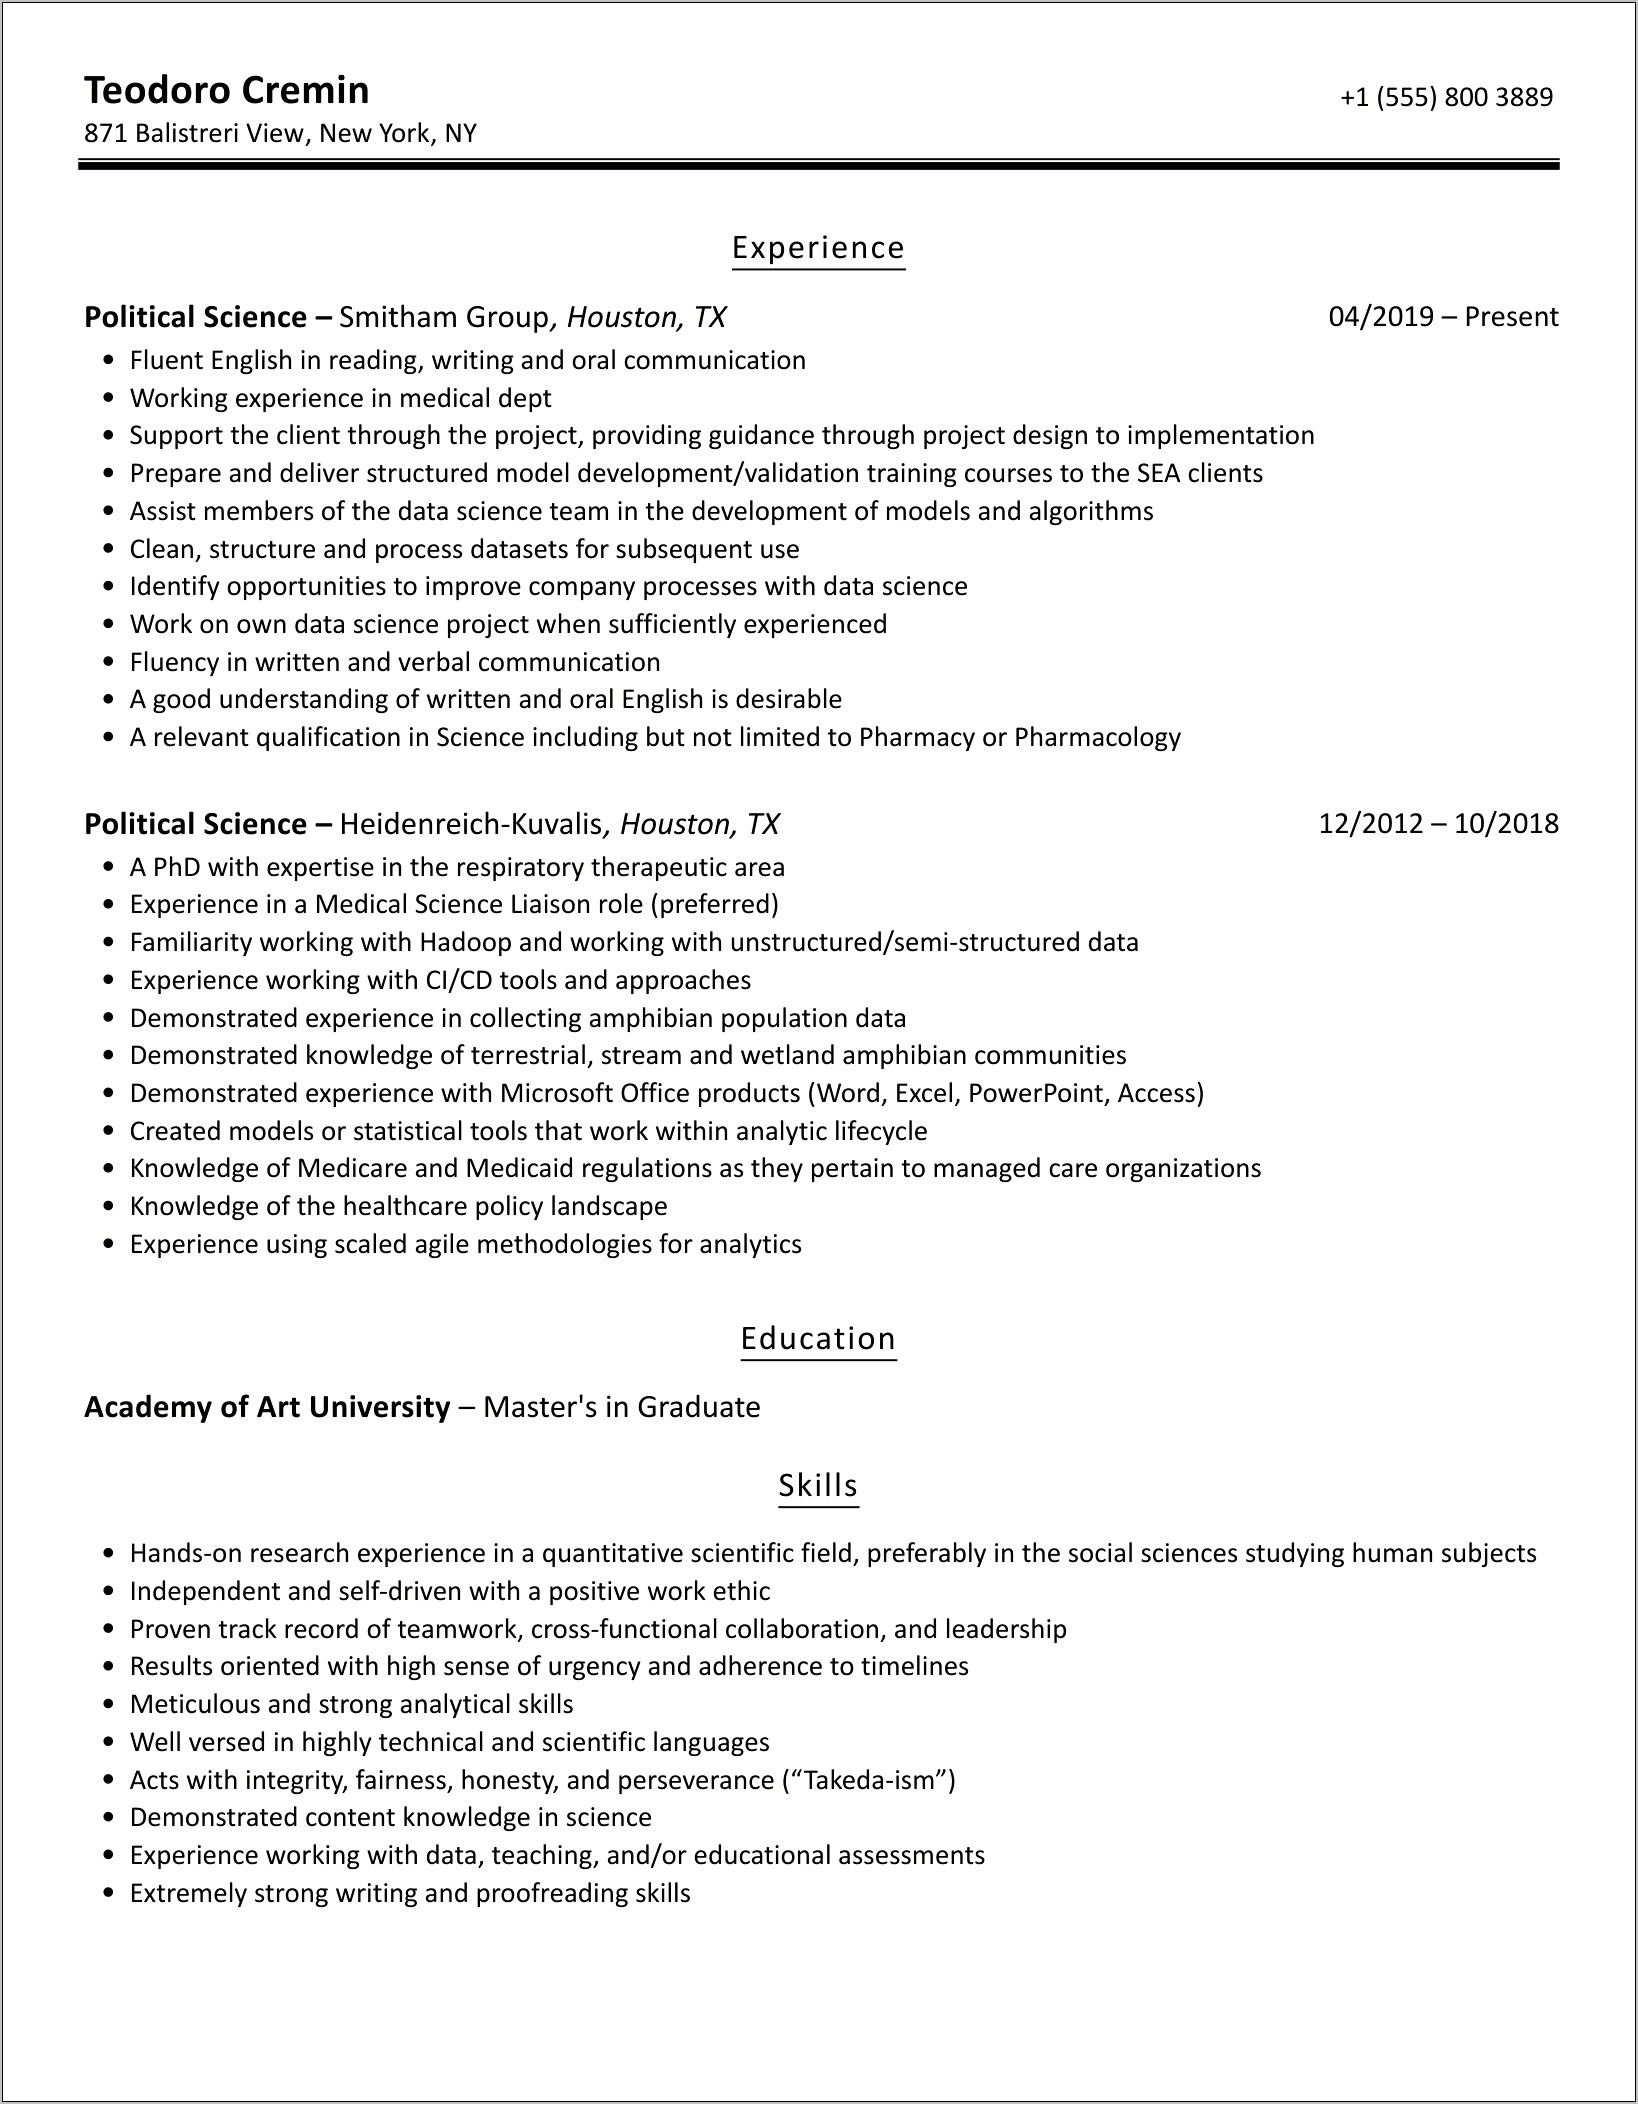 Resume Objective Examples Political Science